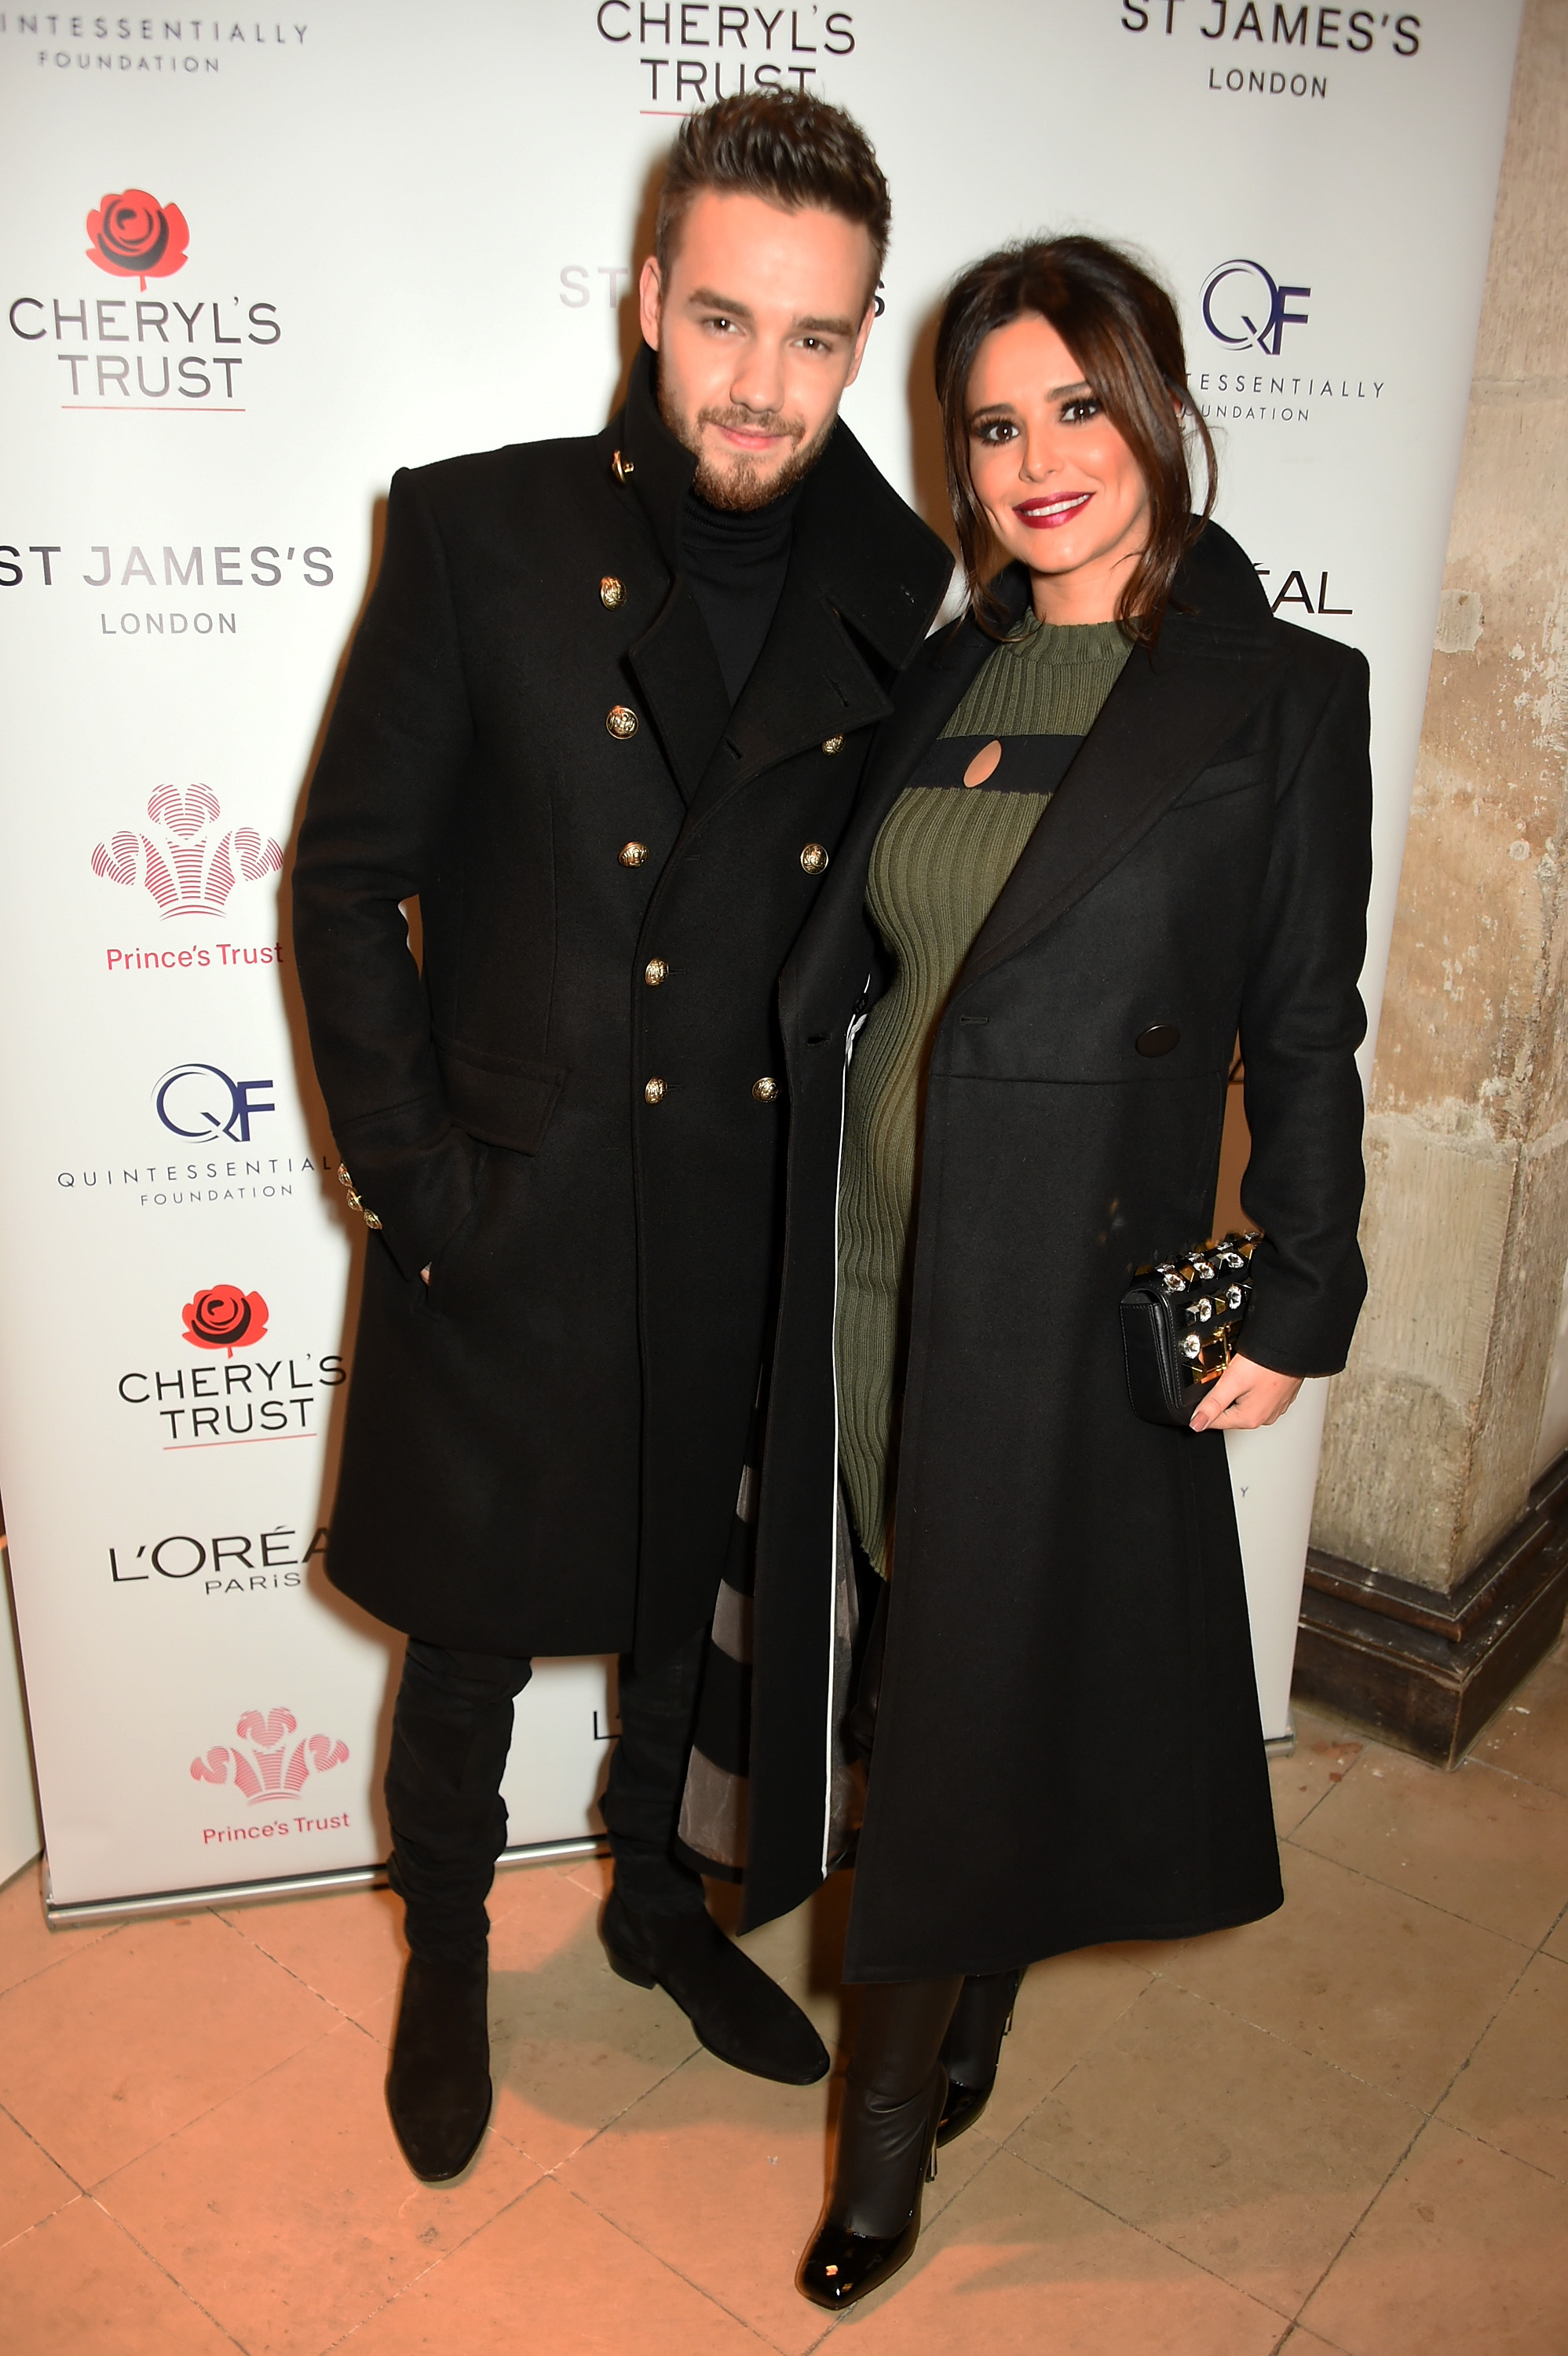 Liam and Cheryl at St James's London carol concert